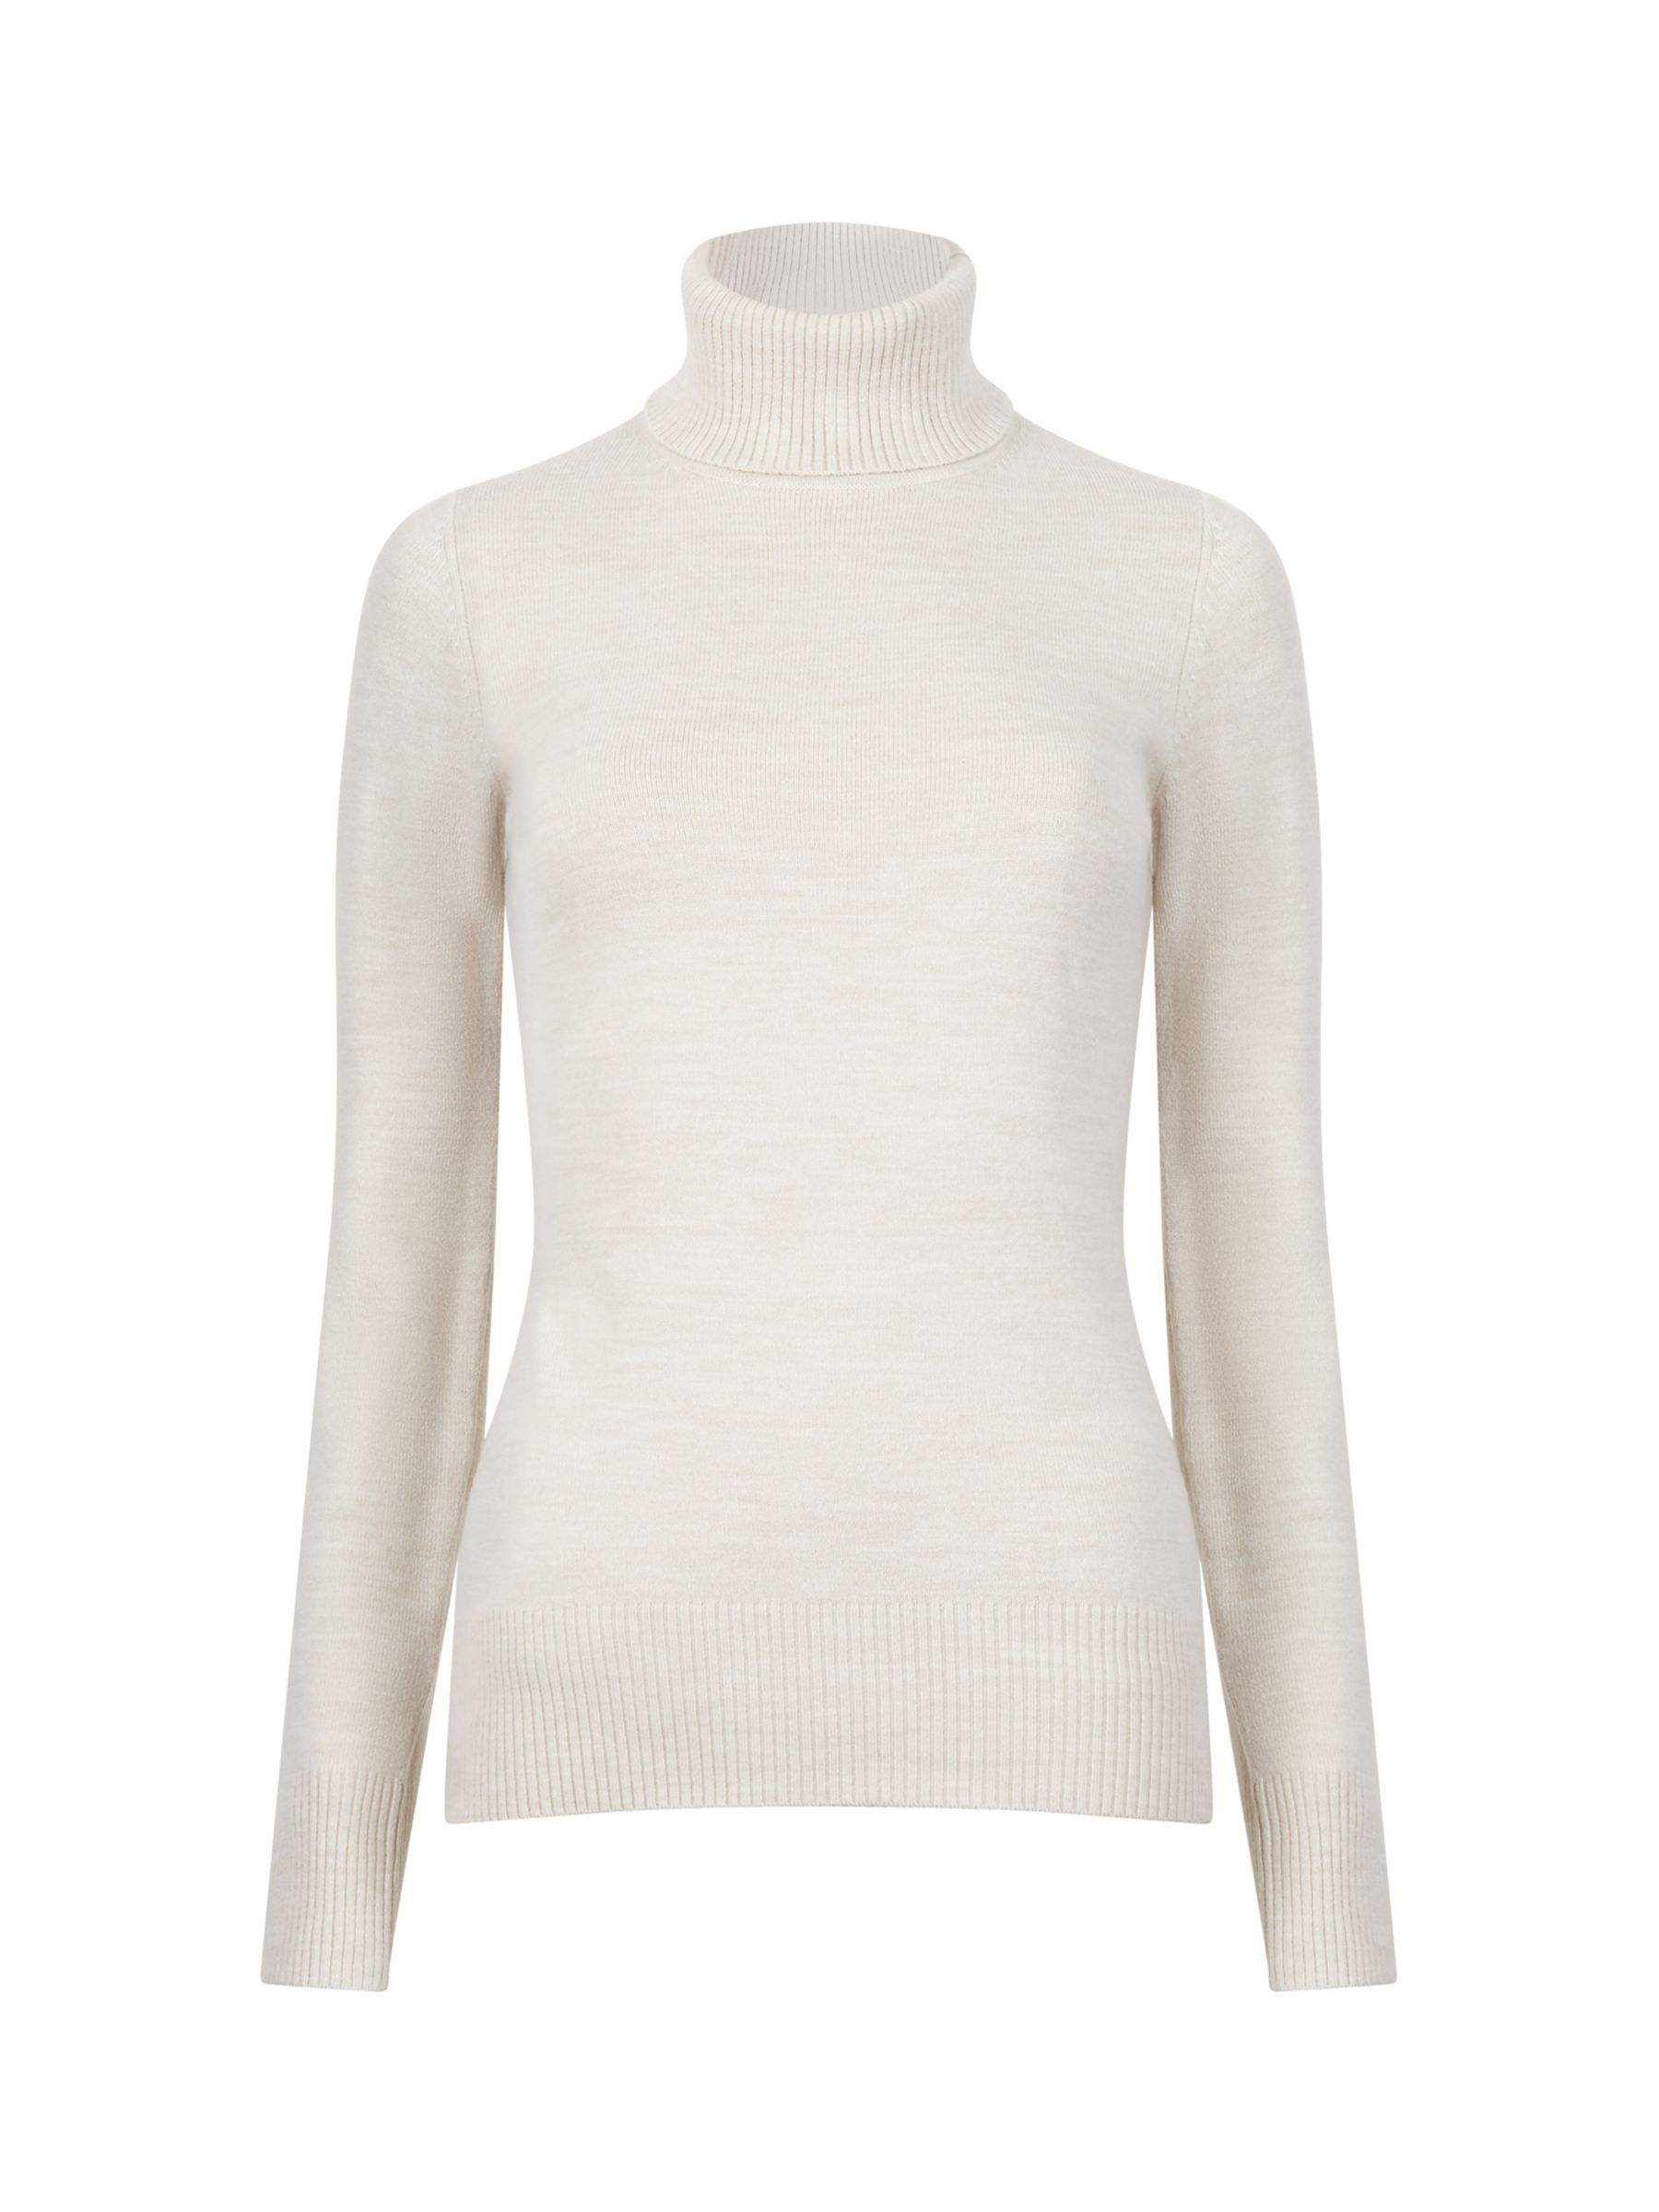 French Connection Babysoft Roll Neck Jumper, Oatmeal at John Lewis ...